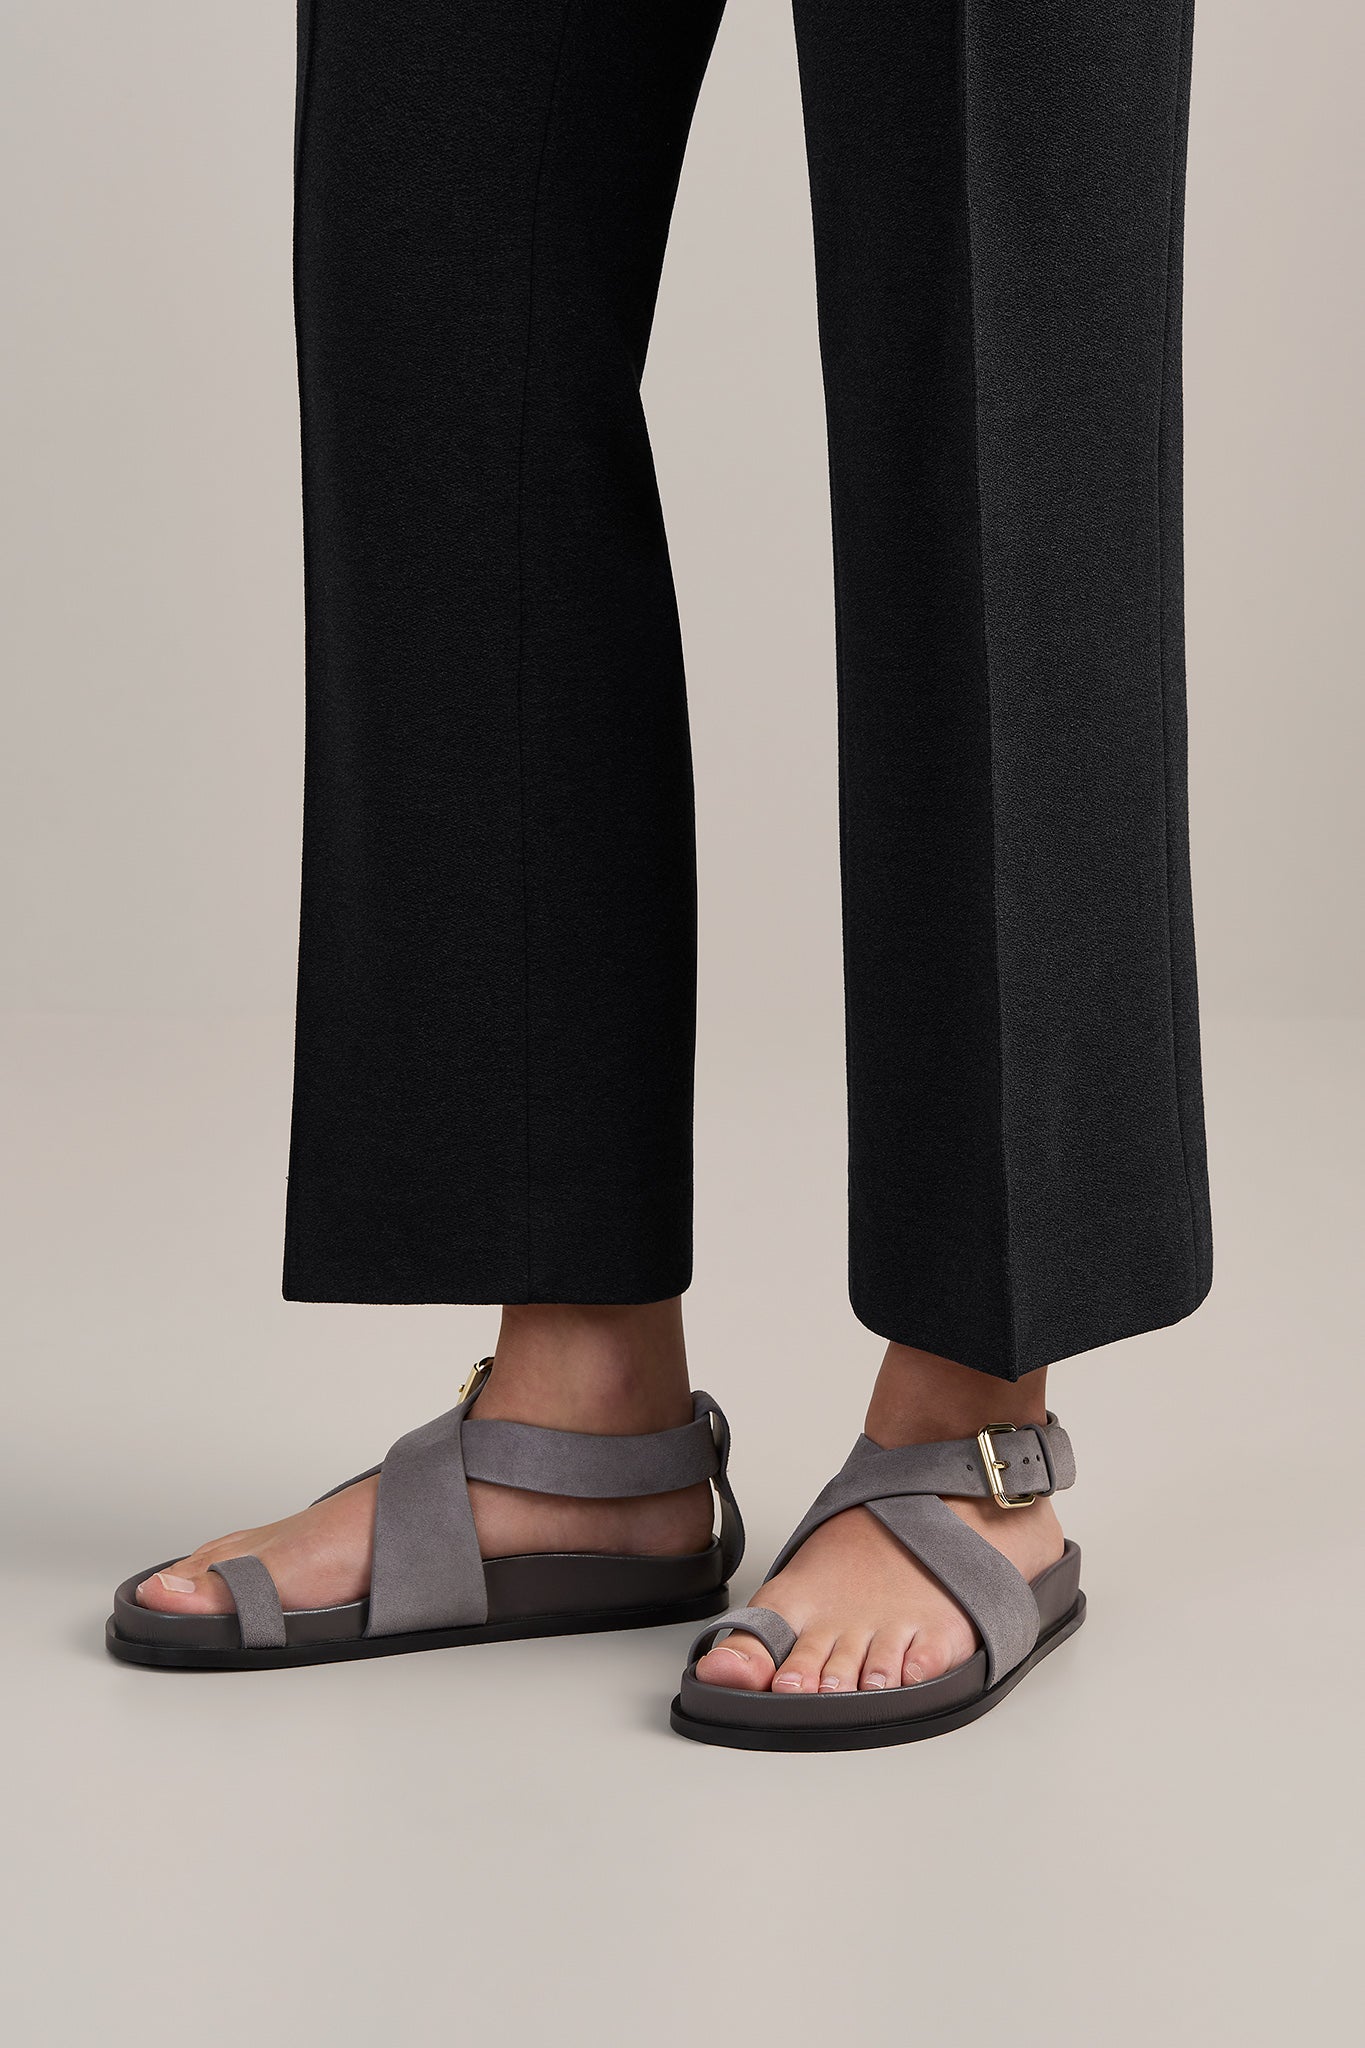 A.Emery | The Dula Sandal - Graphite Suede